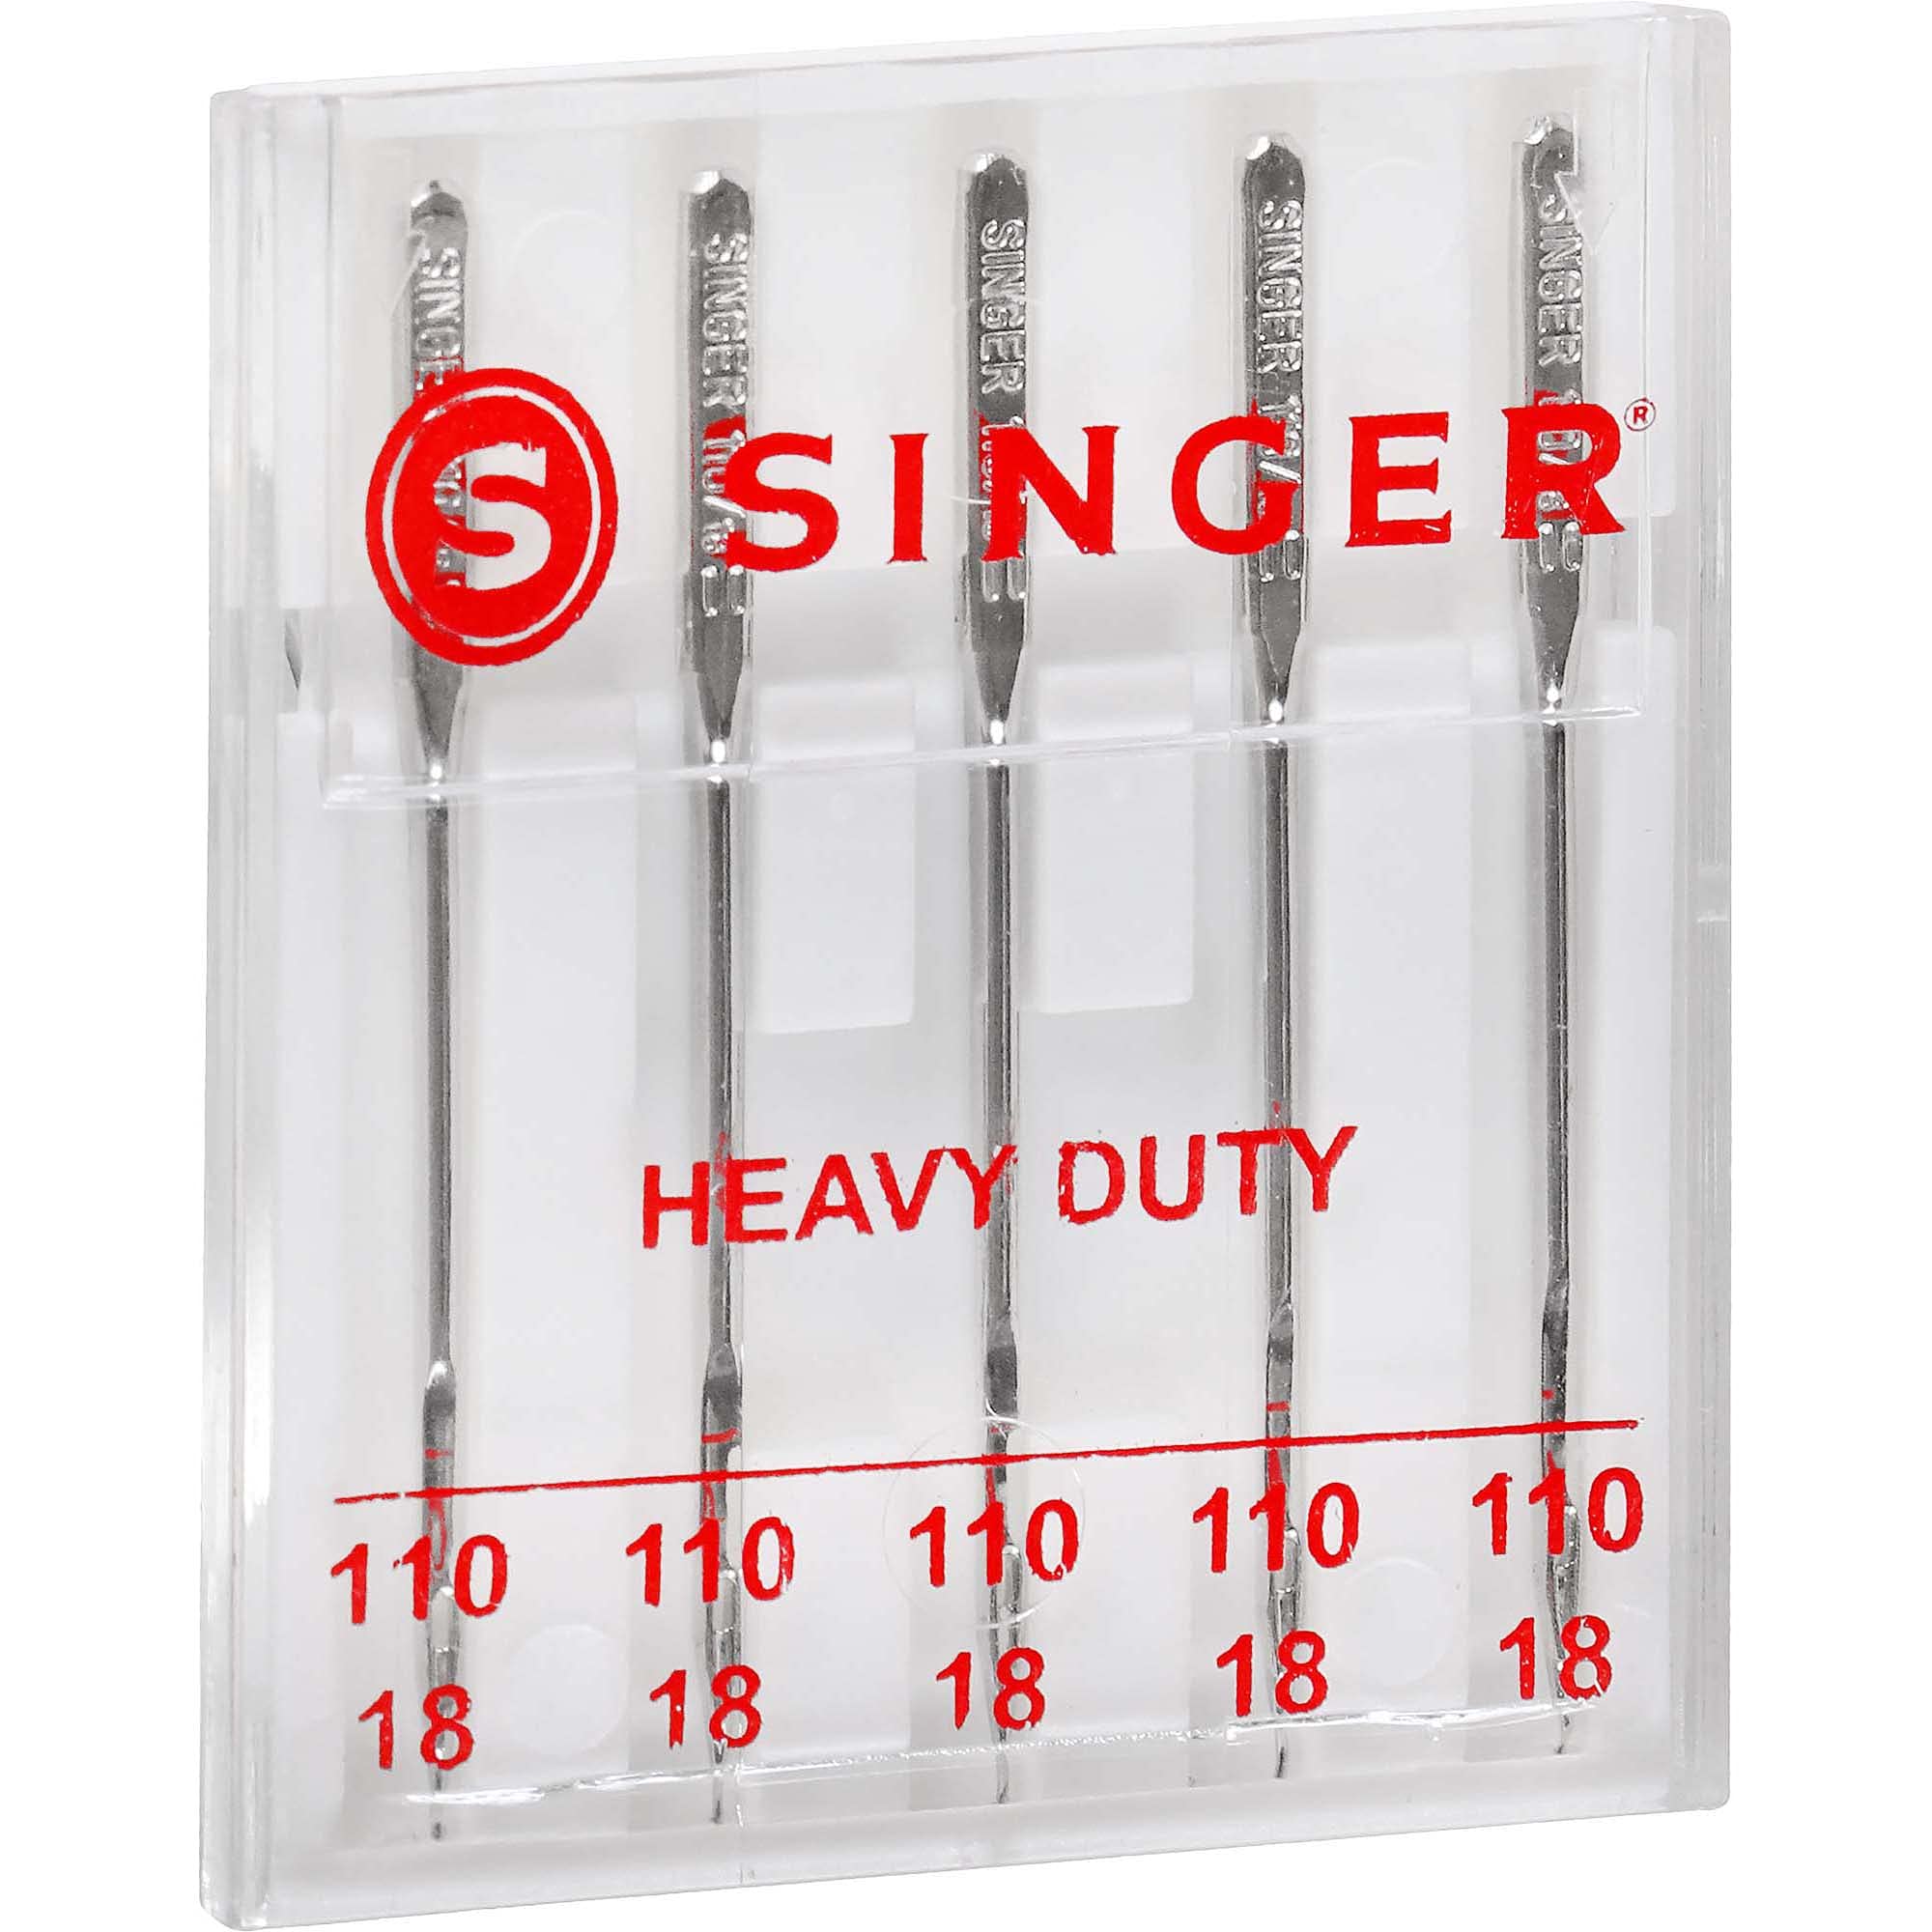 SINGER 04734 Sewing Machine Needles, 5-Count